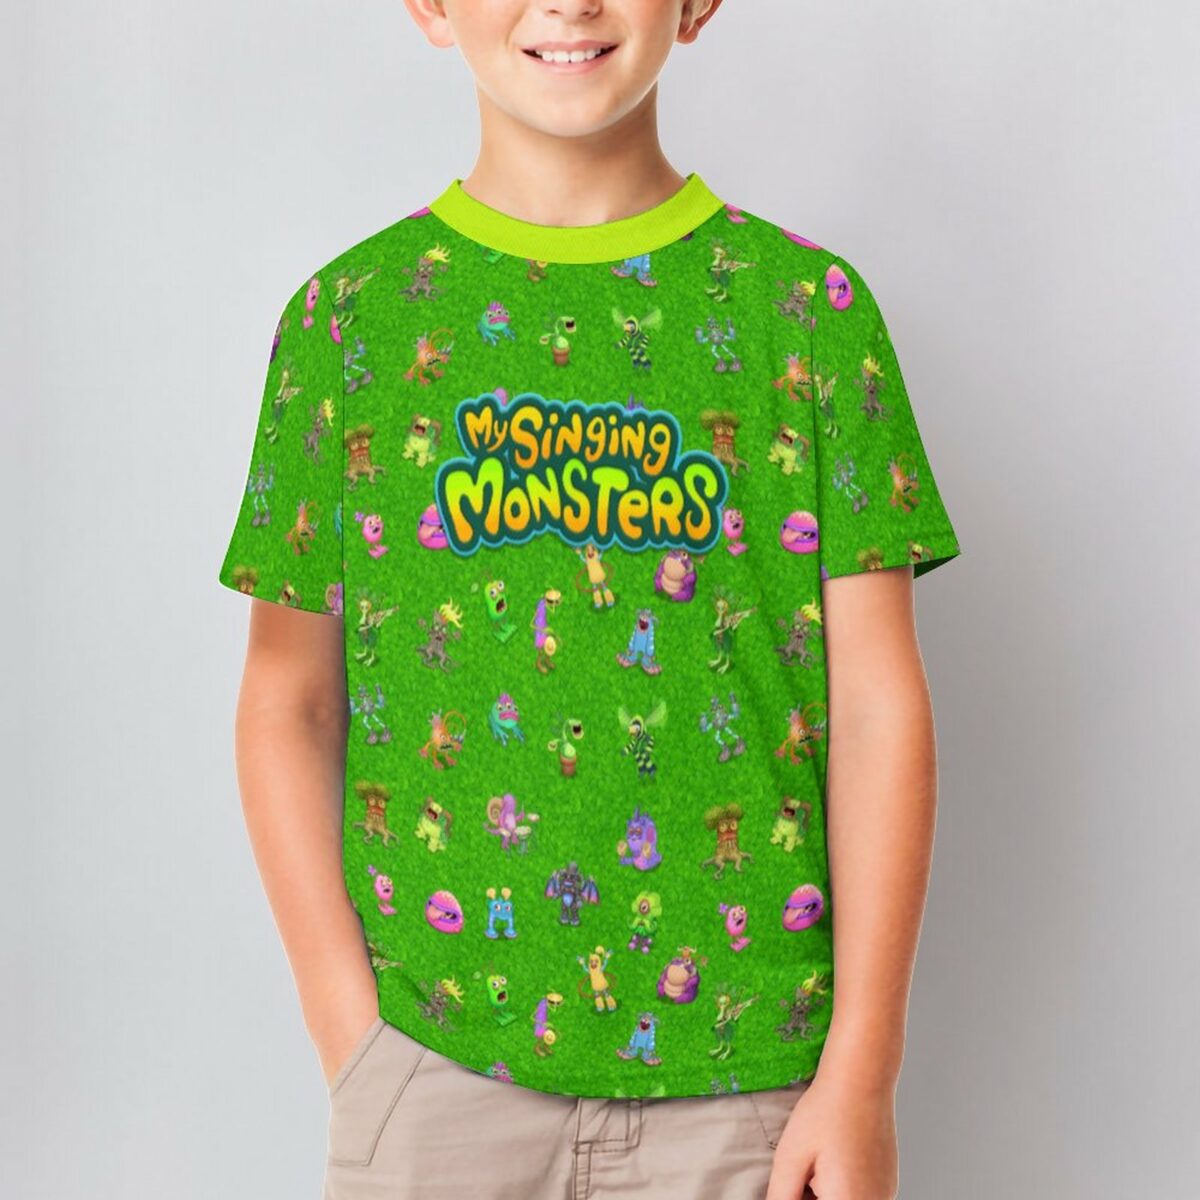 My Singing Monsters Short Sleeve Kid’s T-Shirt ET (All-Over Printing) Cool Kiddo 12